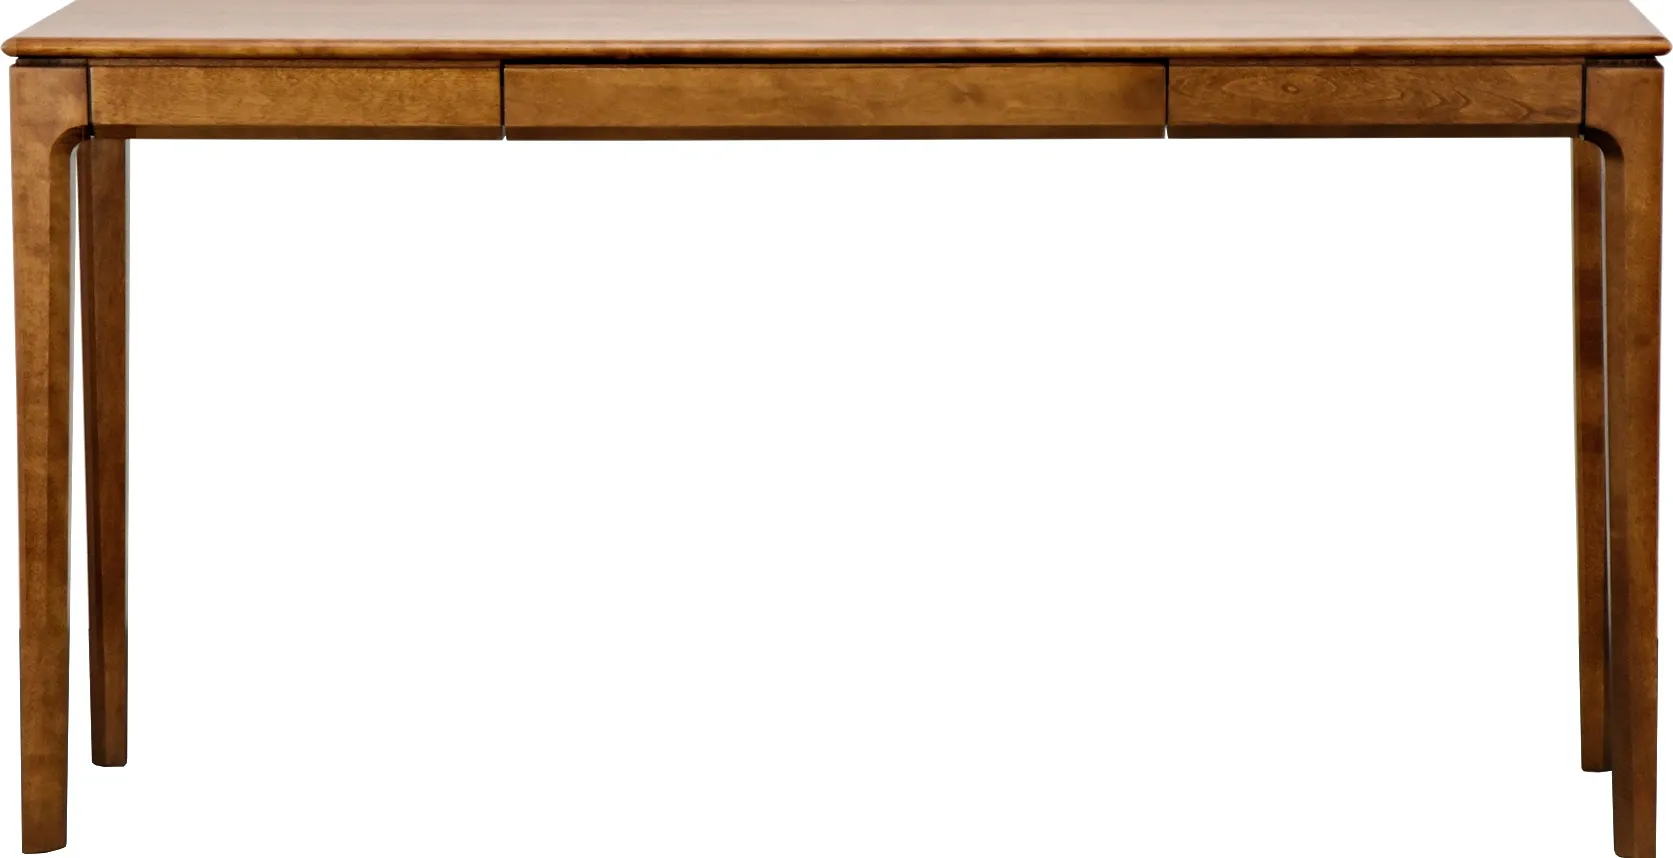 Canadel 1660 CONSOLE TABLE